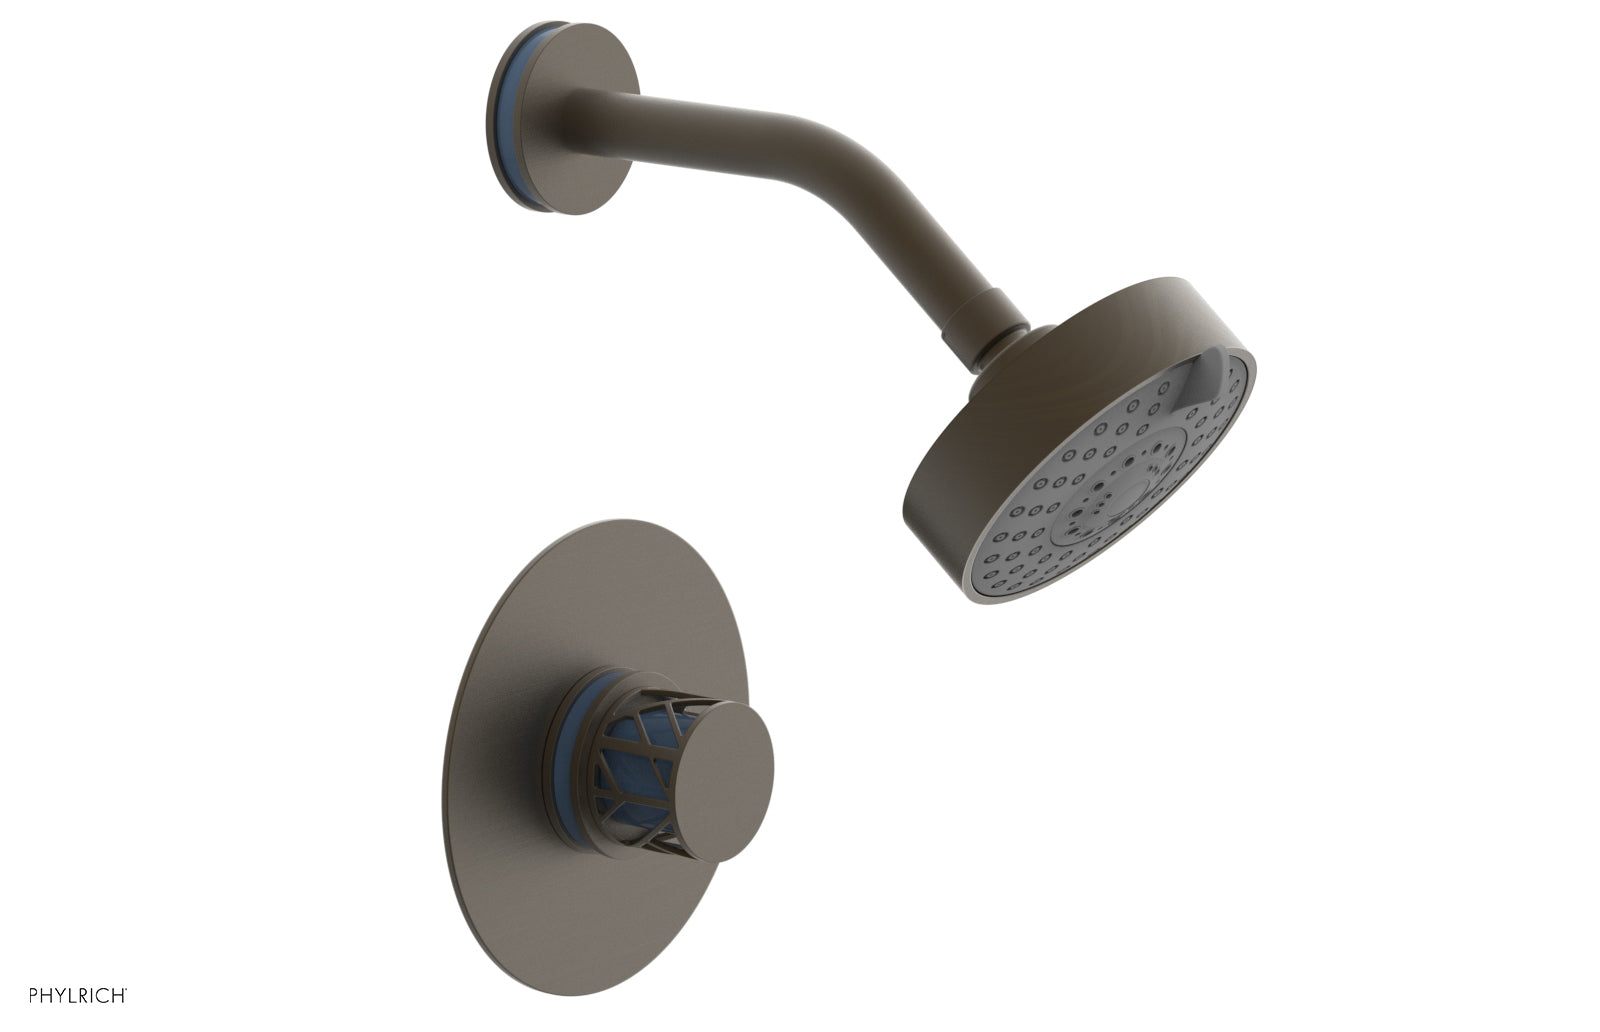 Phylrich JOLIE Pressure Balance Shower Set - Round Handle with "Light Blue" Accents